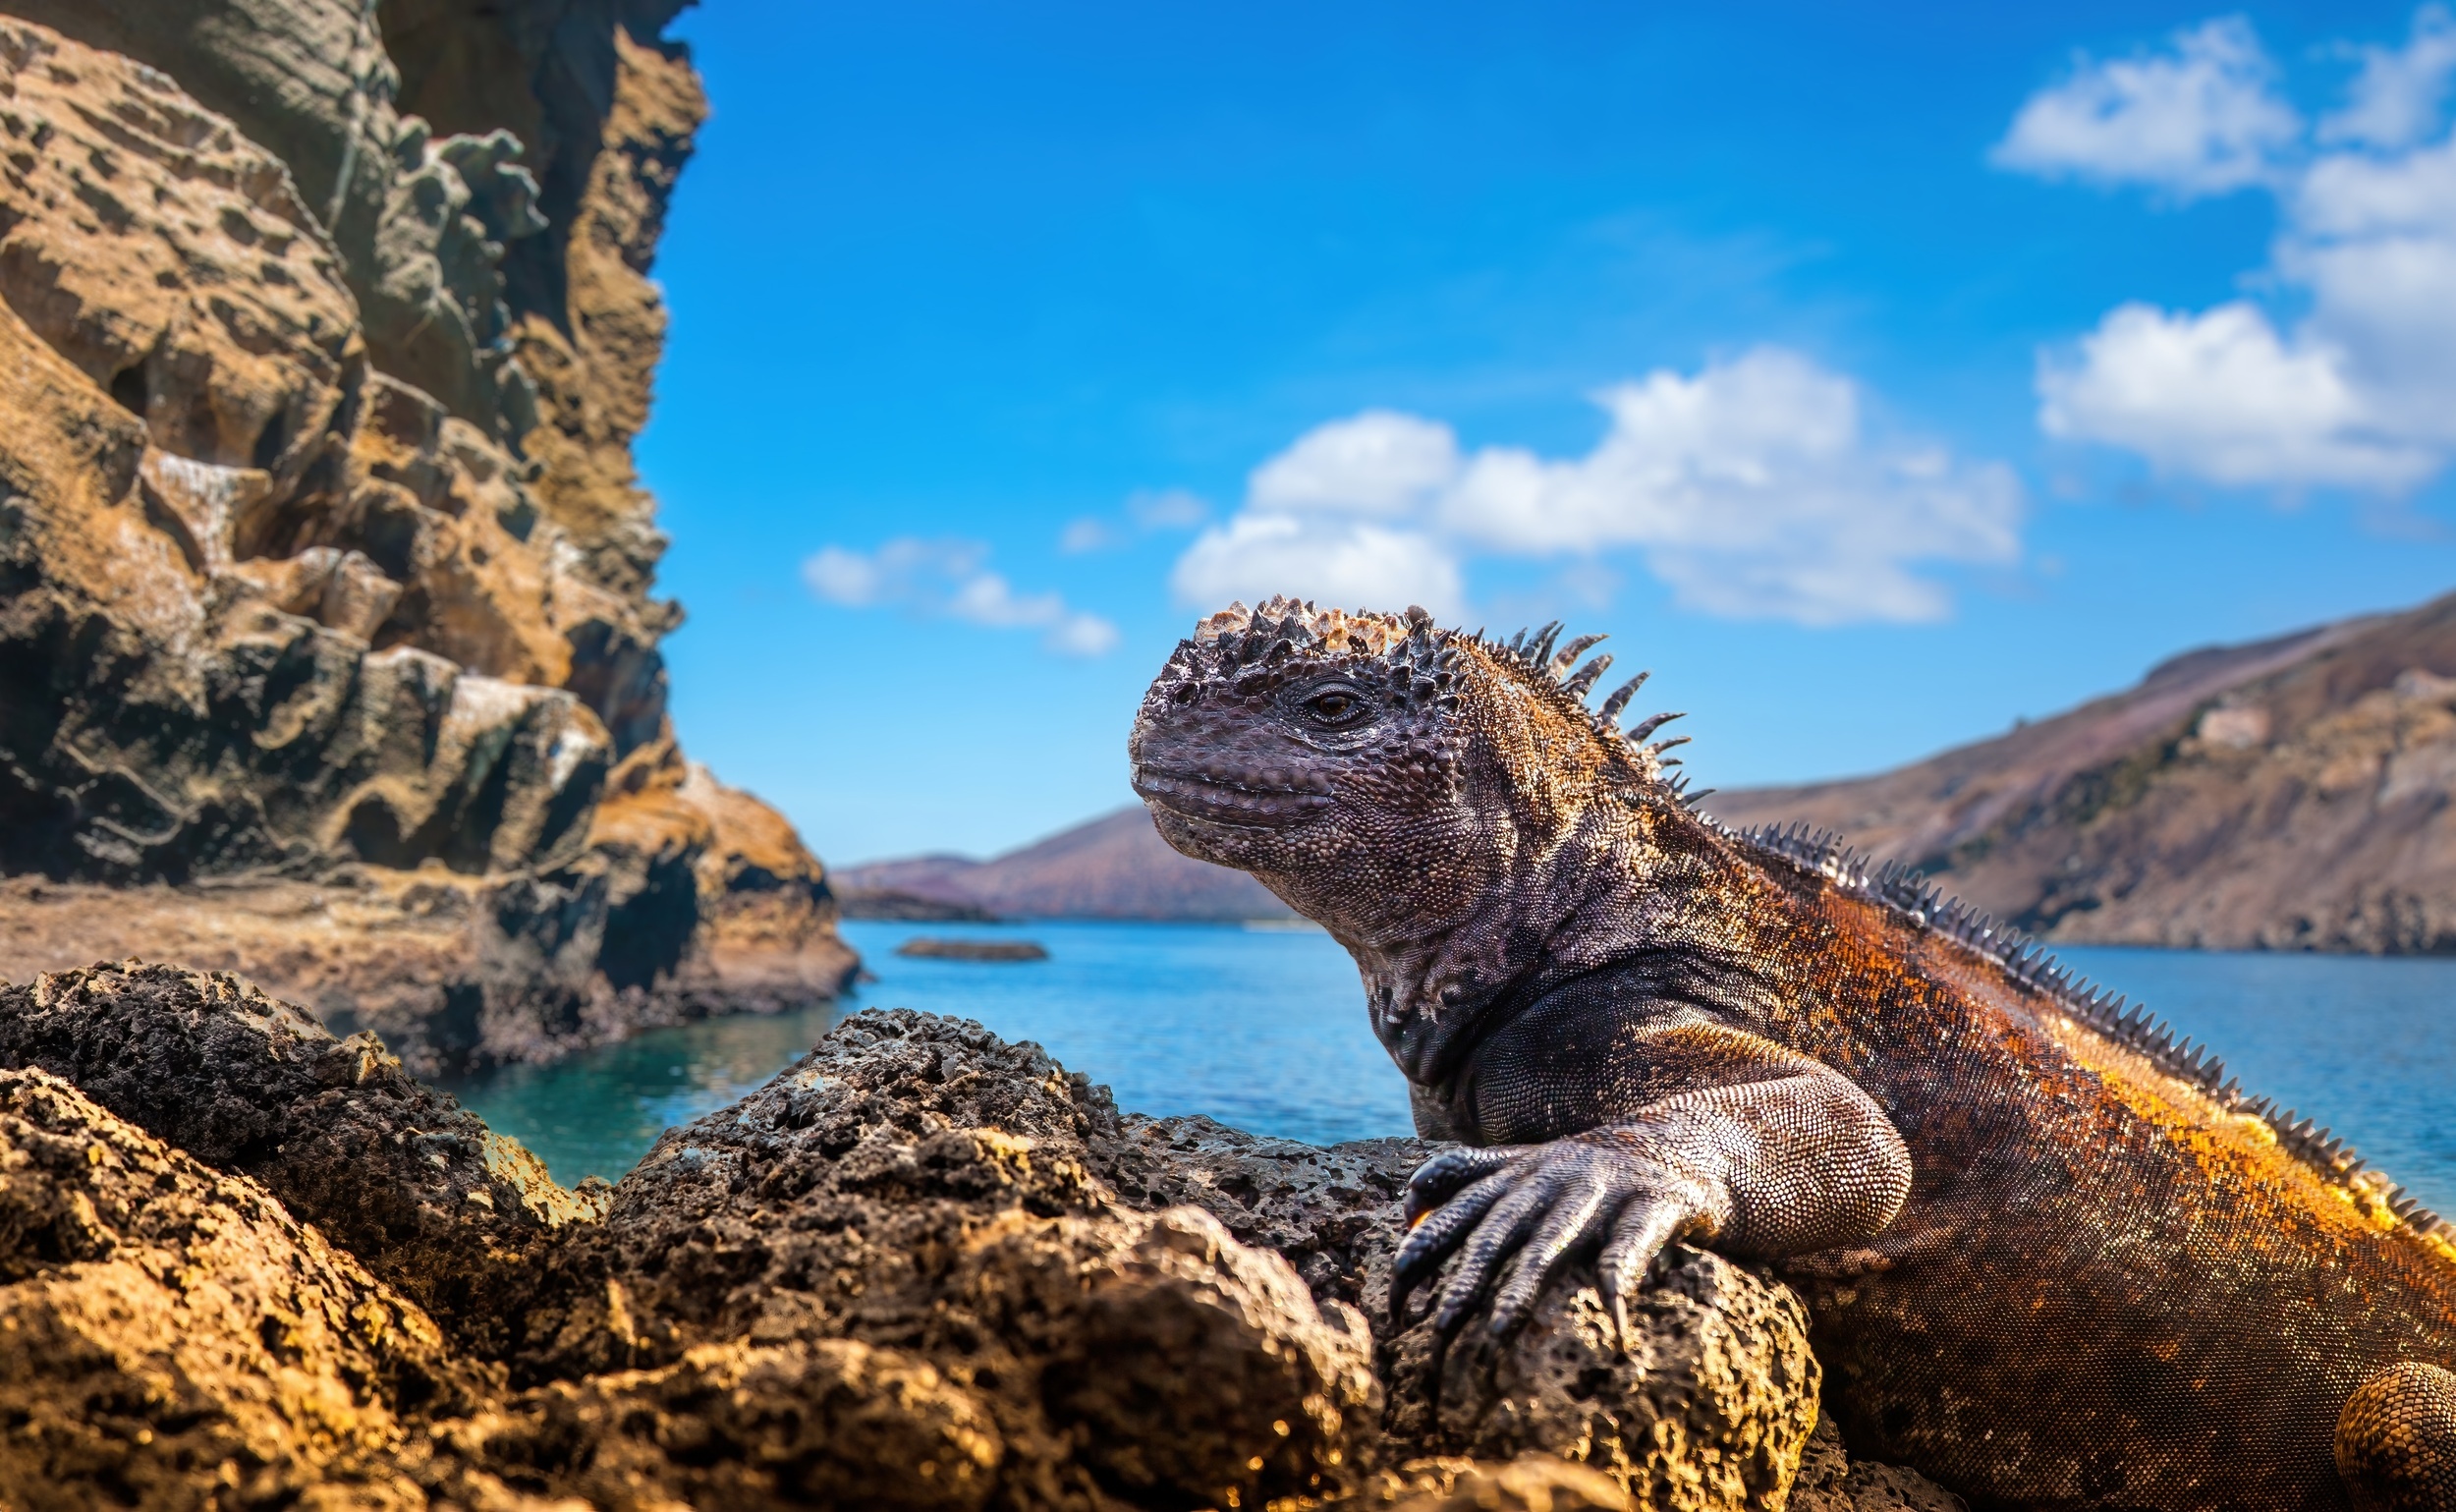 <p>The Galápagos Islands are difficult to get to and have lots of rules — you can’t spend the night there, for example — but for anyone with an affinity for wildlife, they’re heaven on earth. If you can manage the cost and the traveling headaches, it’ll be well worth the hassle. </p><p>You may also like: <a href='https://www.yardbarker.com/lifestyle/articles/10_unique_dishes_found_down_under_in_australia/s1__38269577'>10 unique dishes found down under in Australia</a></p>